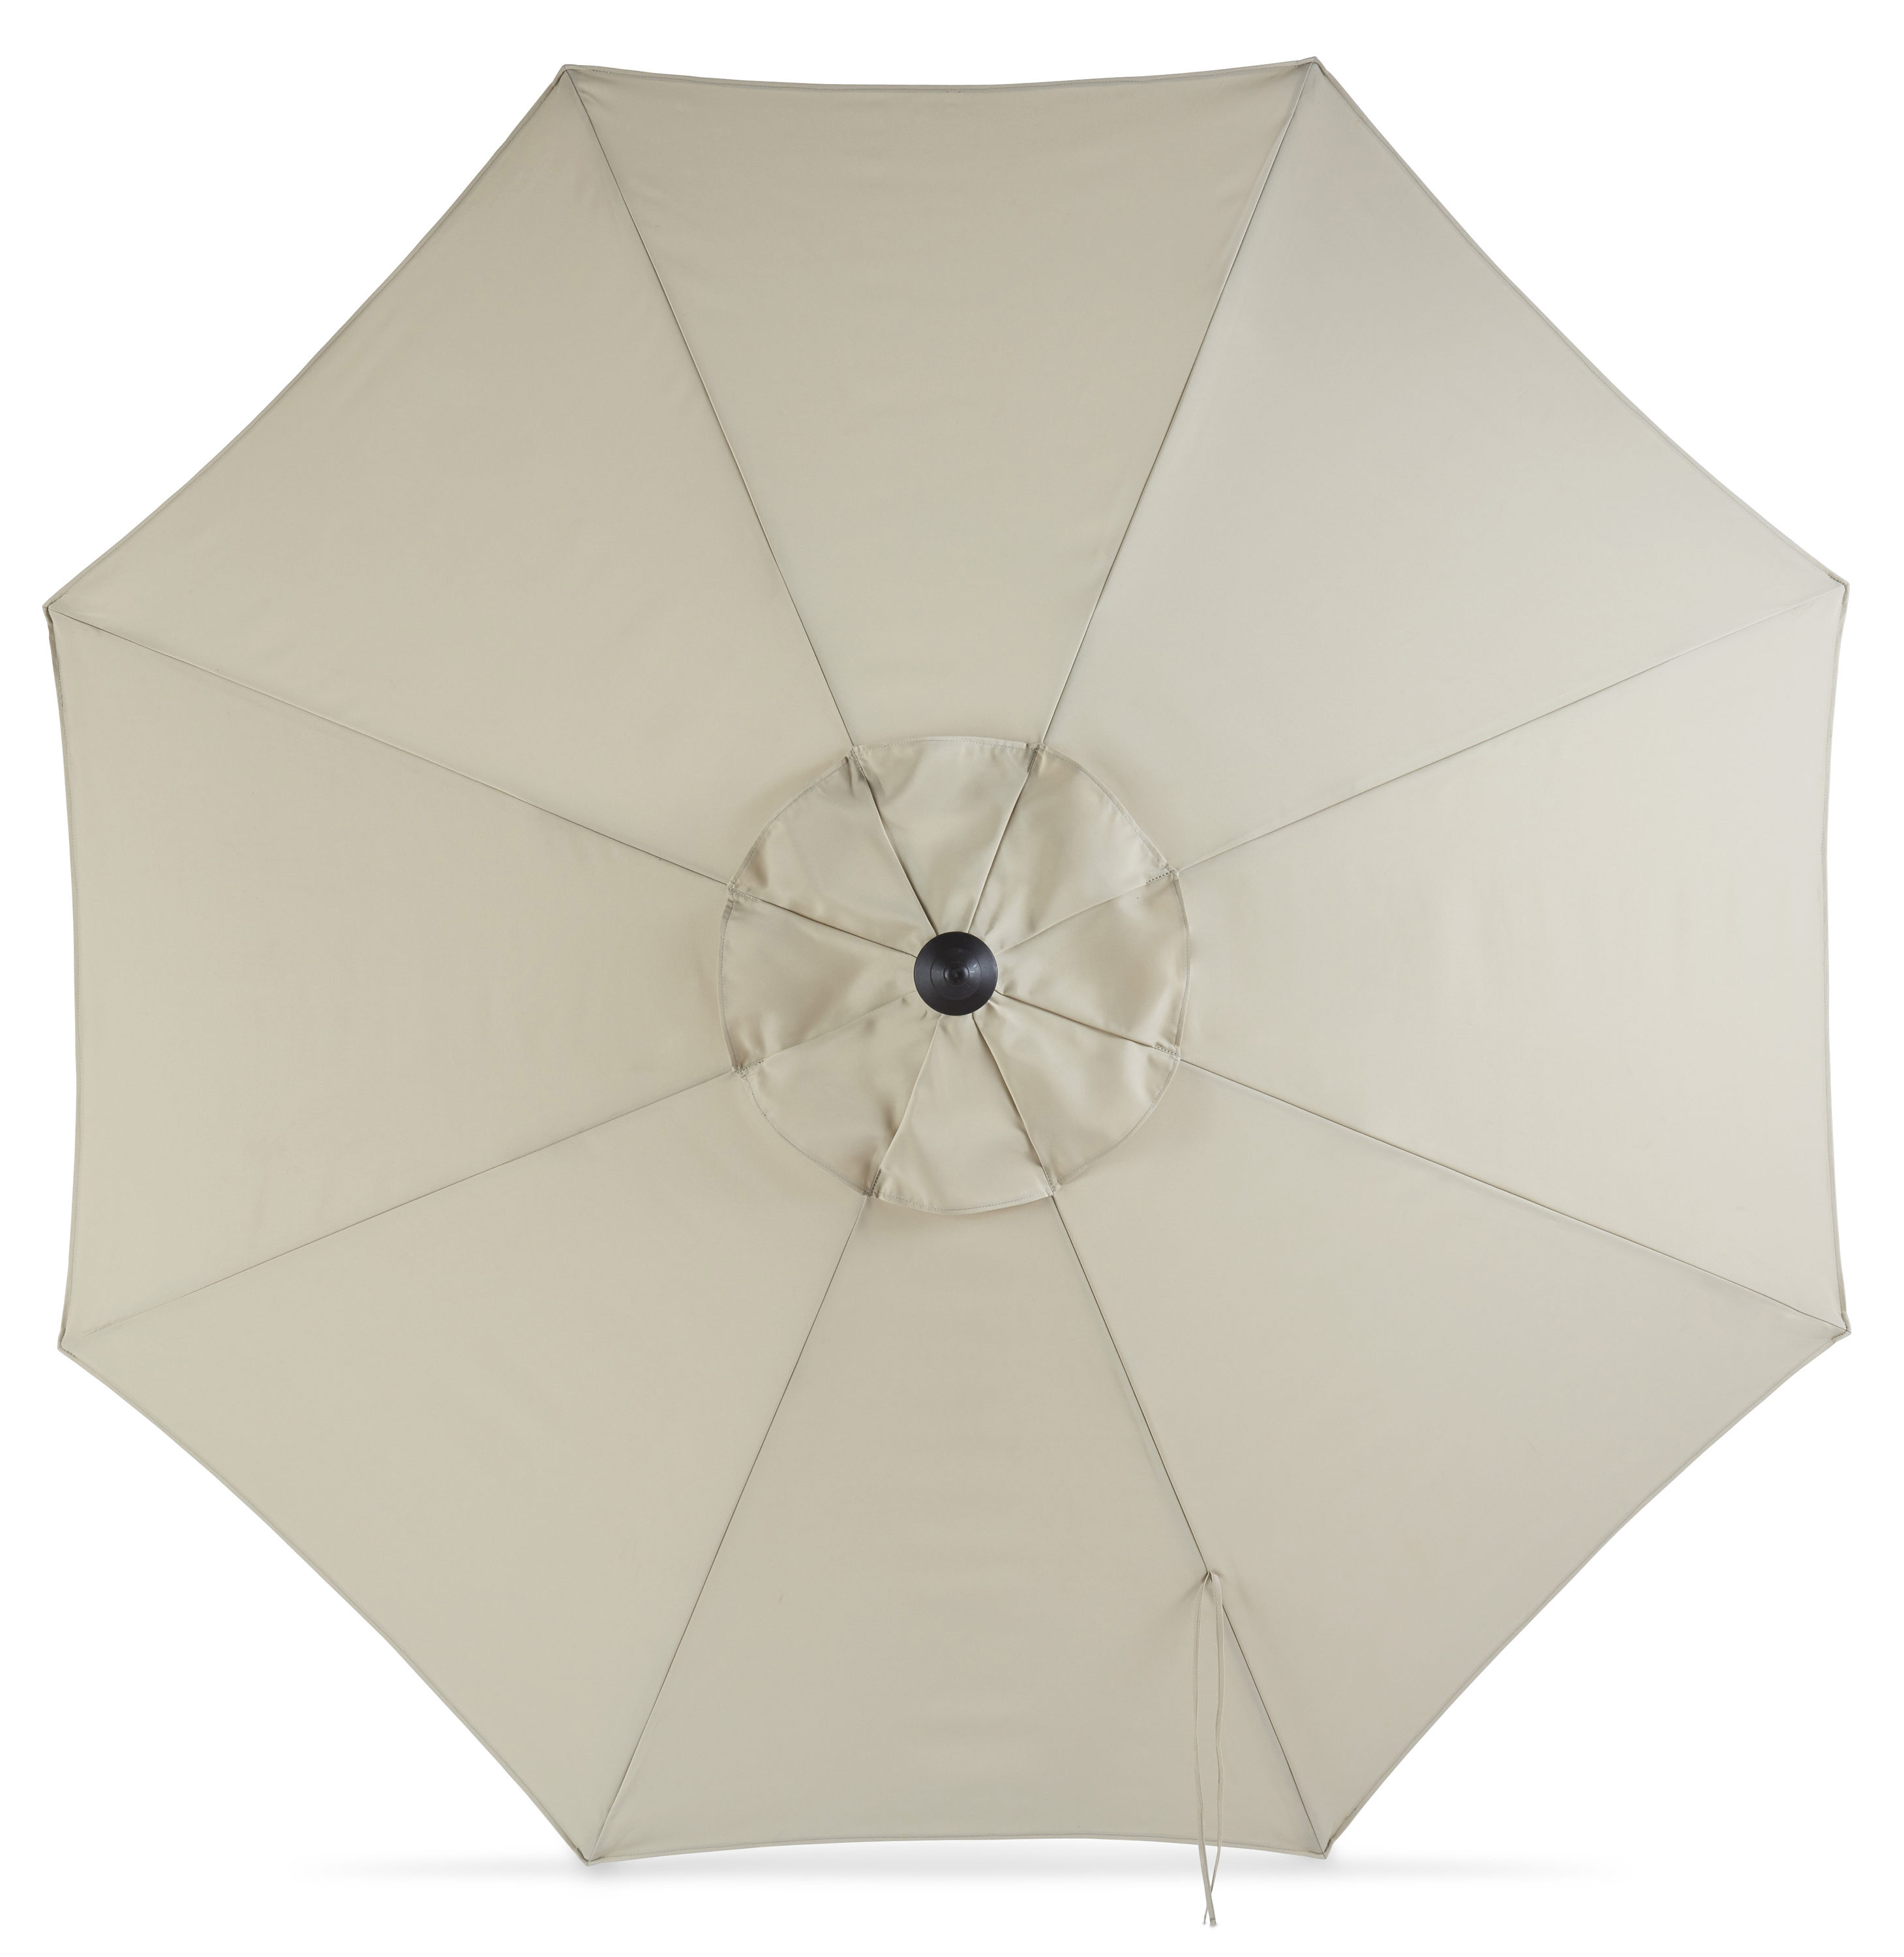 BE EVERY DAY 9FT OUTDOOR WATER/ UV RESISTANT MARKET PATIO UMBRELLA W/ CRA 50035 